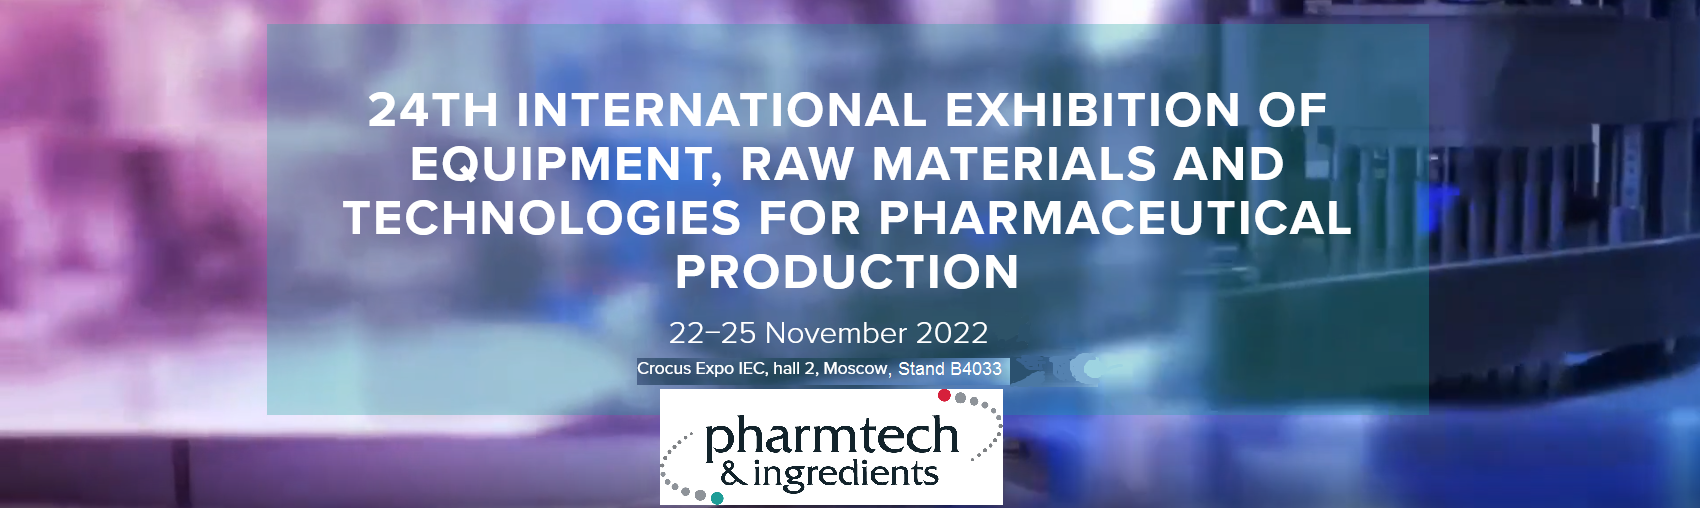 Technofilter at the 24th International Exhibition Pharmtech & Ingredients-2022 in Moscow.